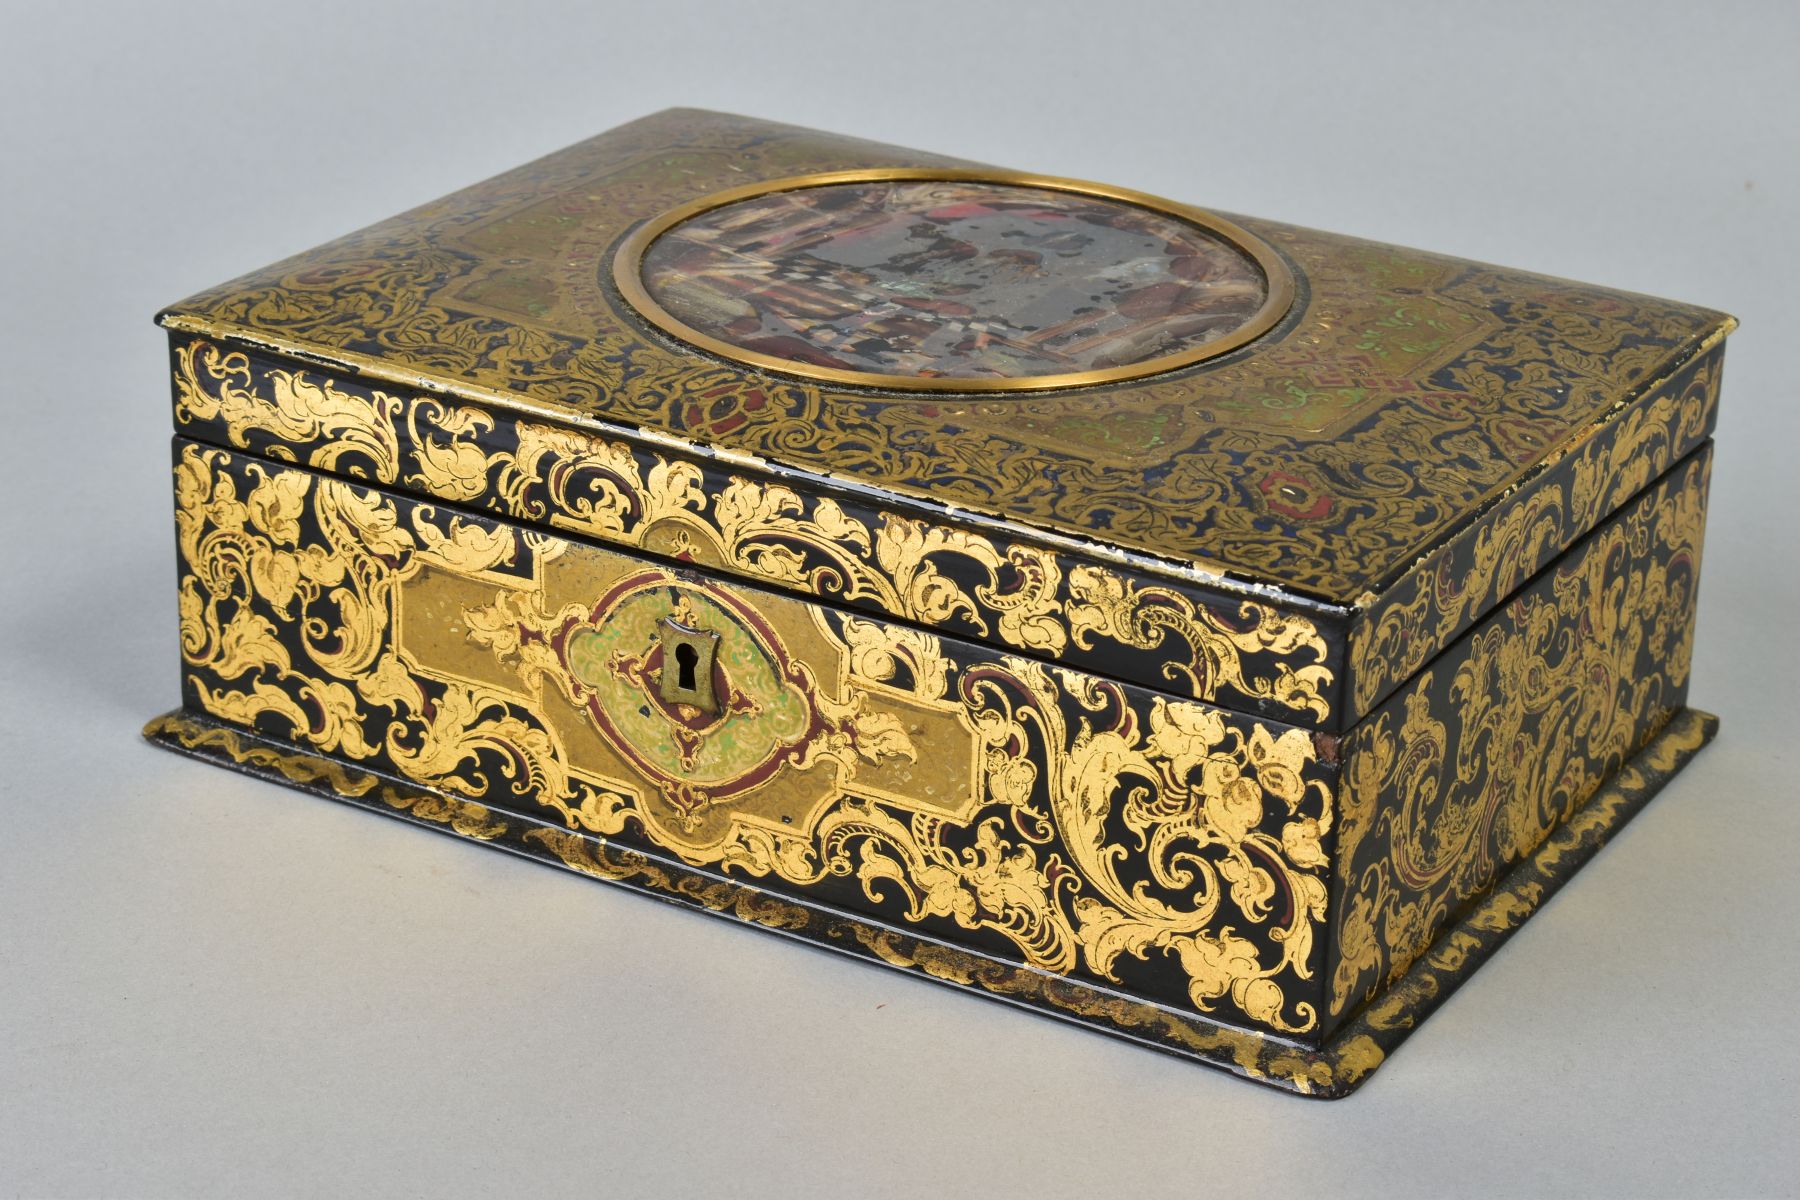 A VICTORIAN PAPIER-MACHE BOX BY CLAY, decorated throughout with gilt foliage, the hinged lid inset - Image 4 of 7